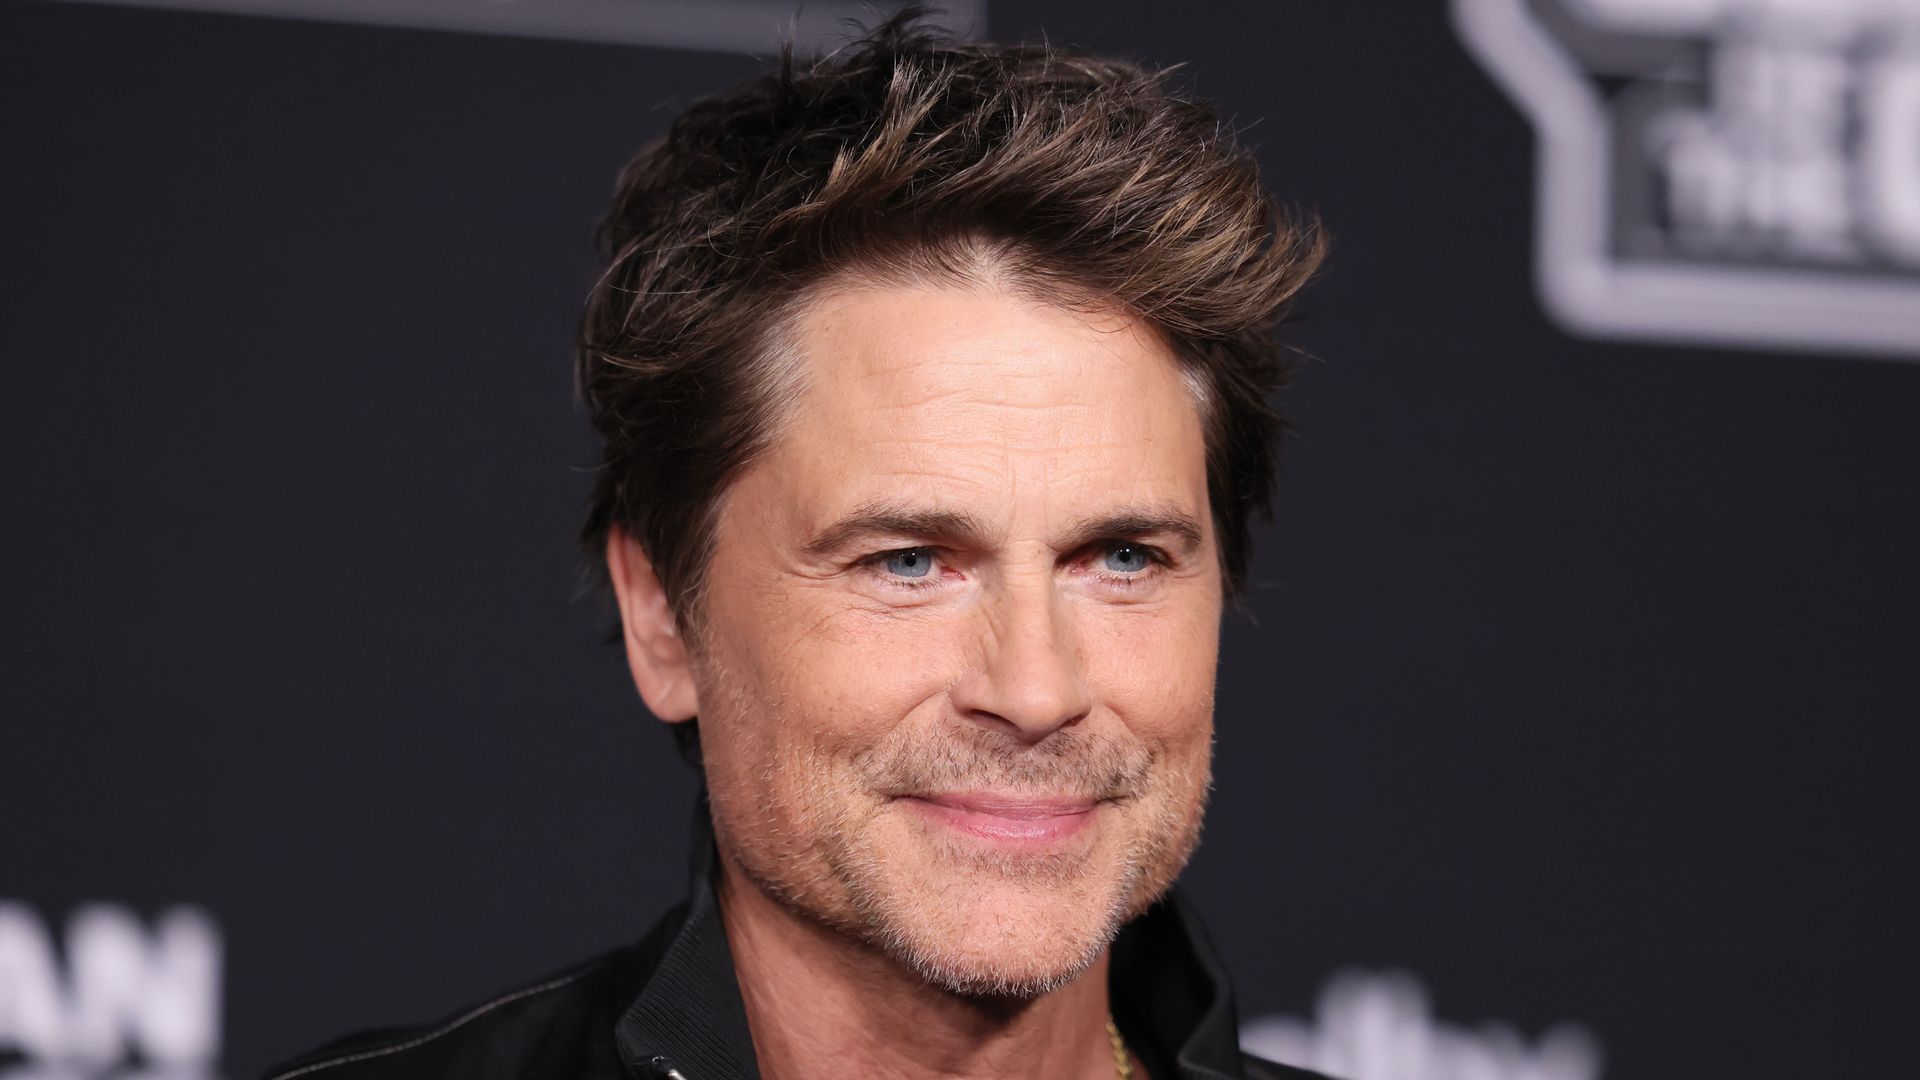 Rob Lowe attends the world premiere of "Guardians of the Galaxy Vol. 3" 